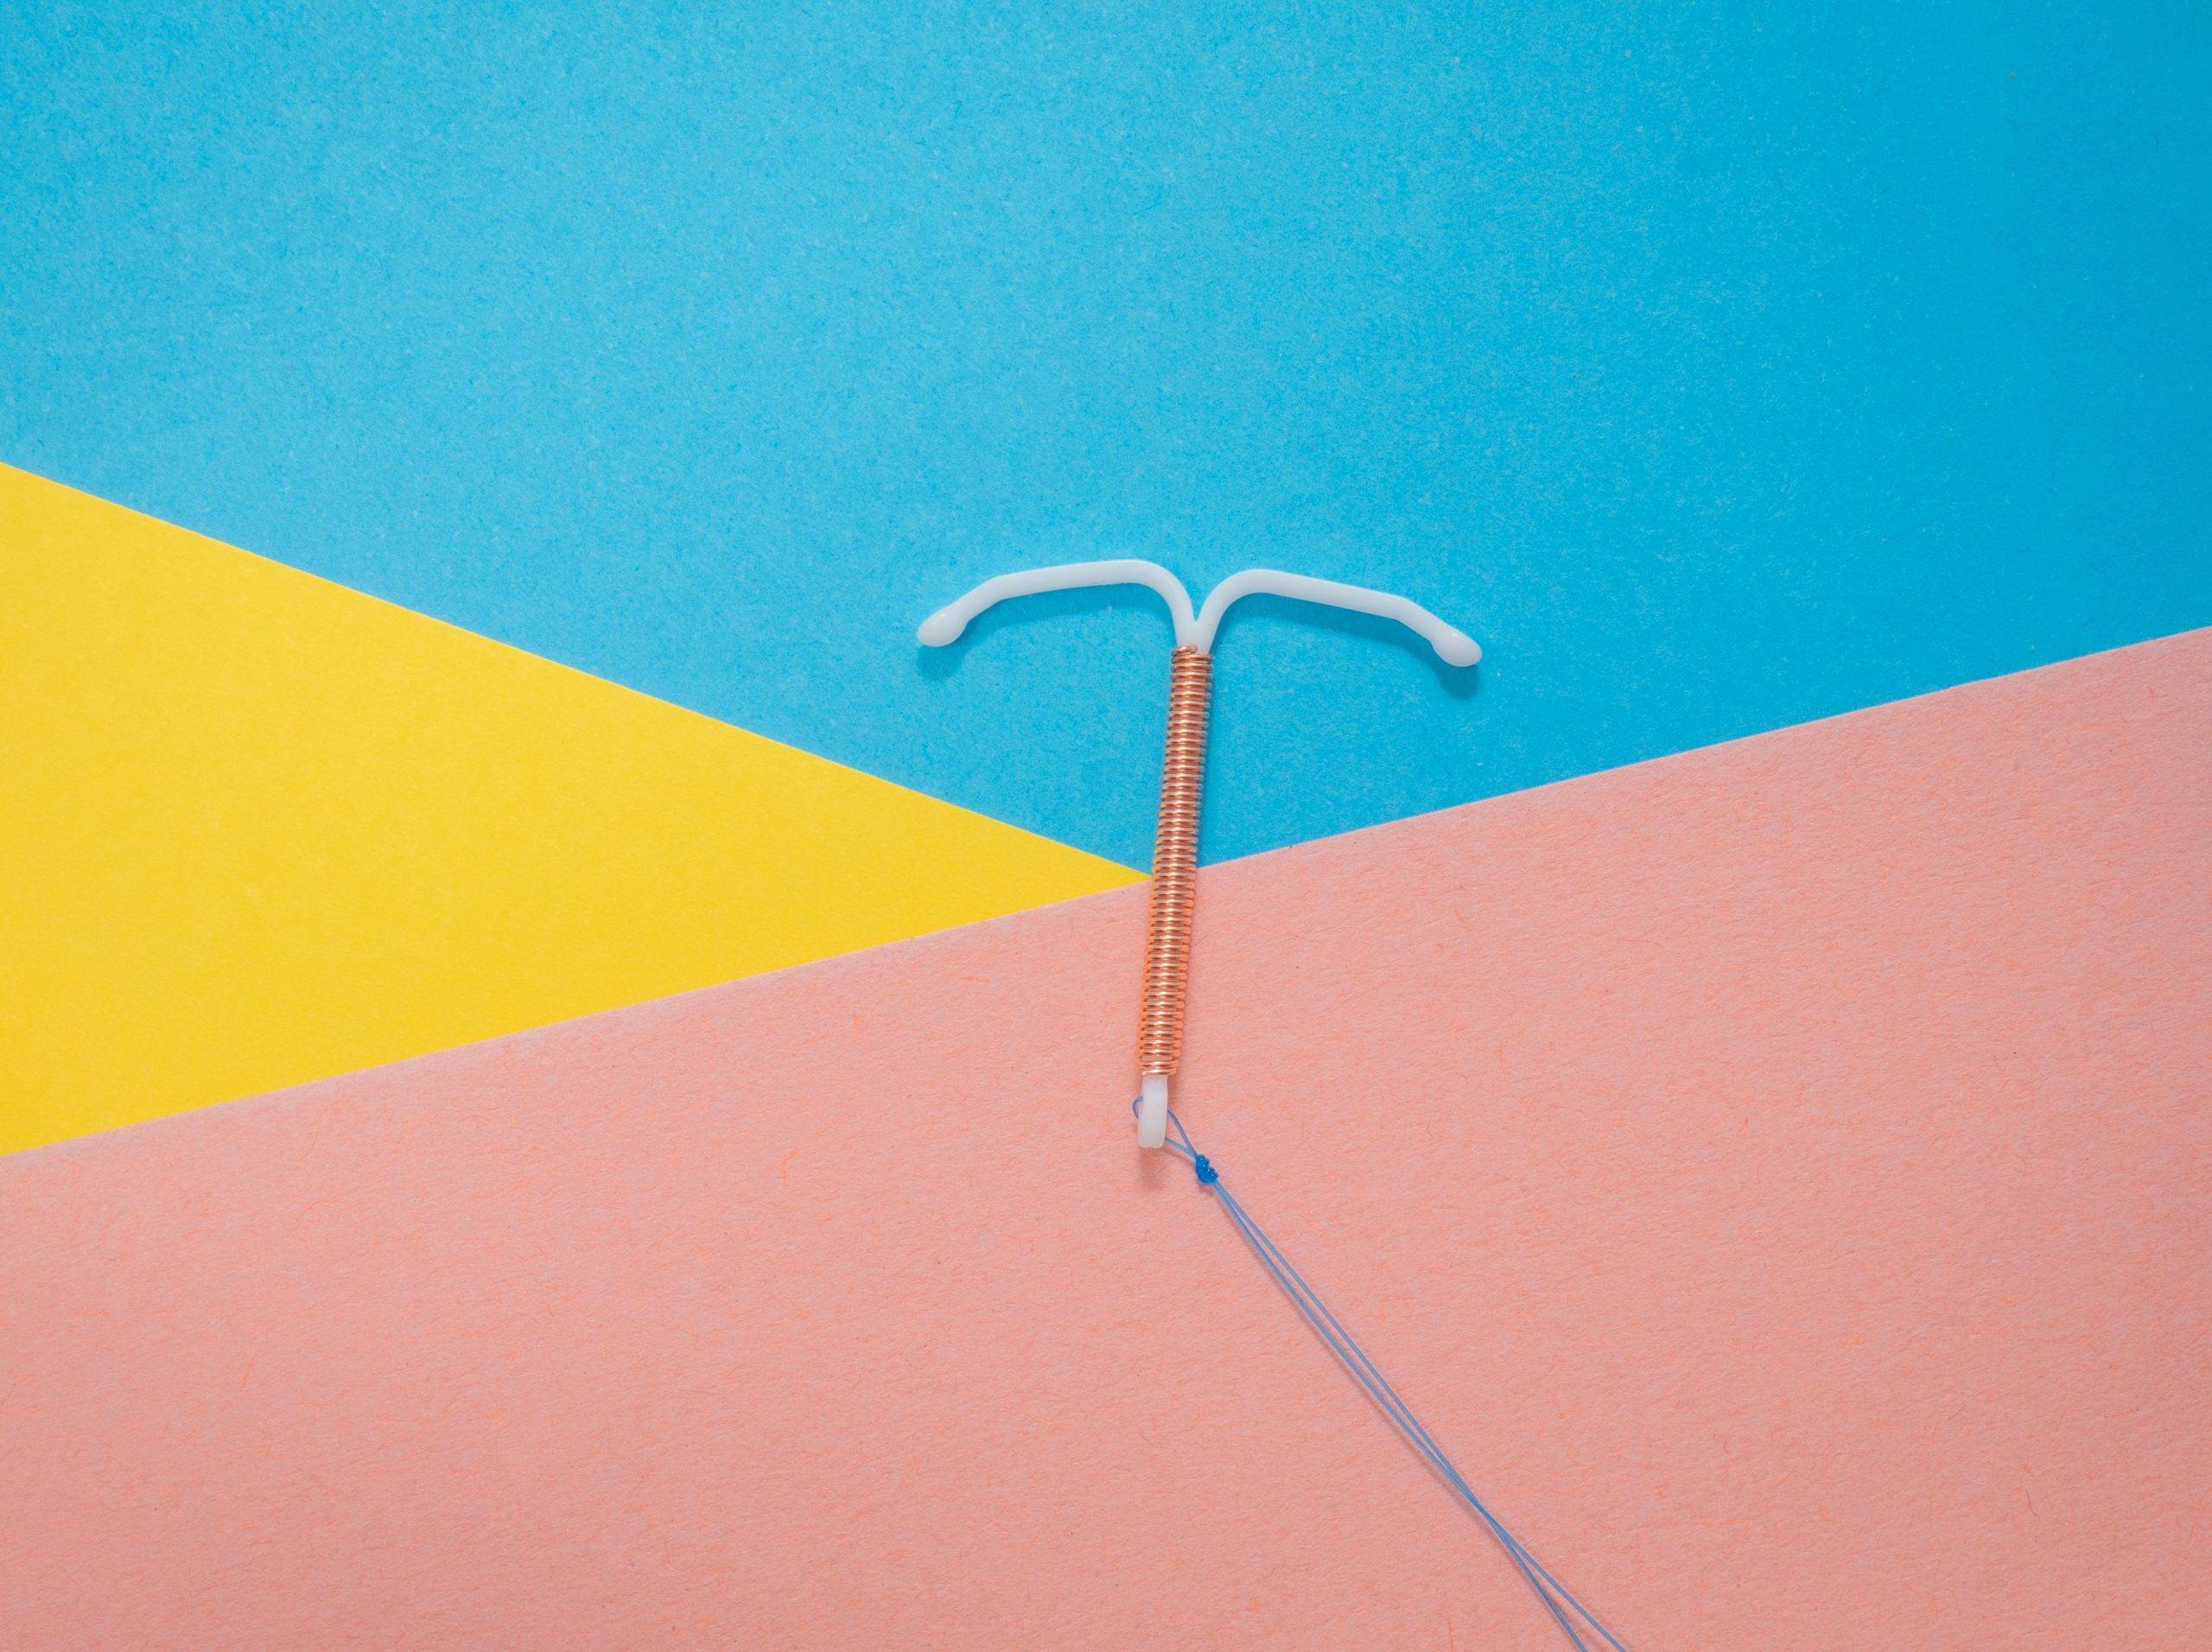 pastel-pink-blue-yellow-background-copper-iud